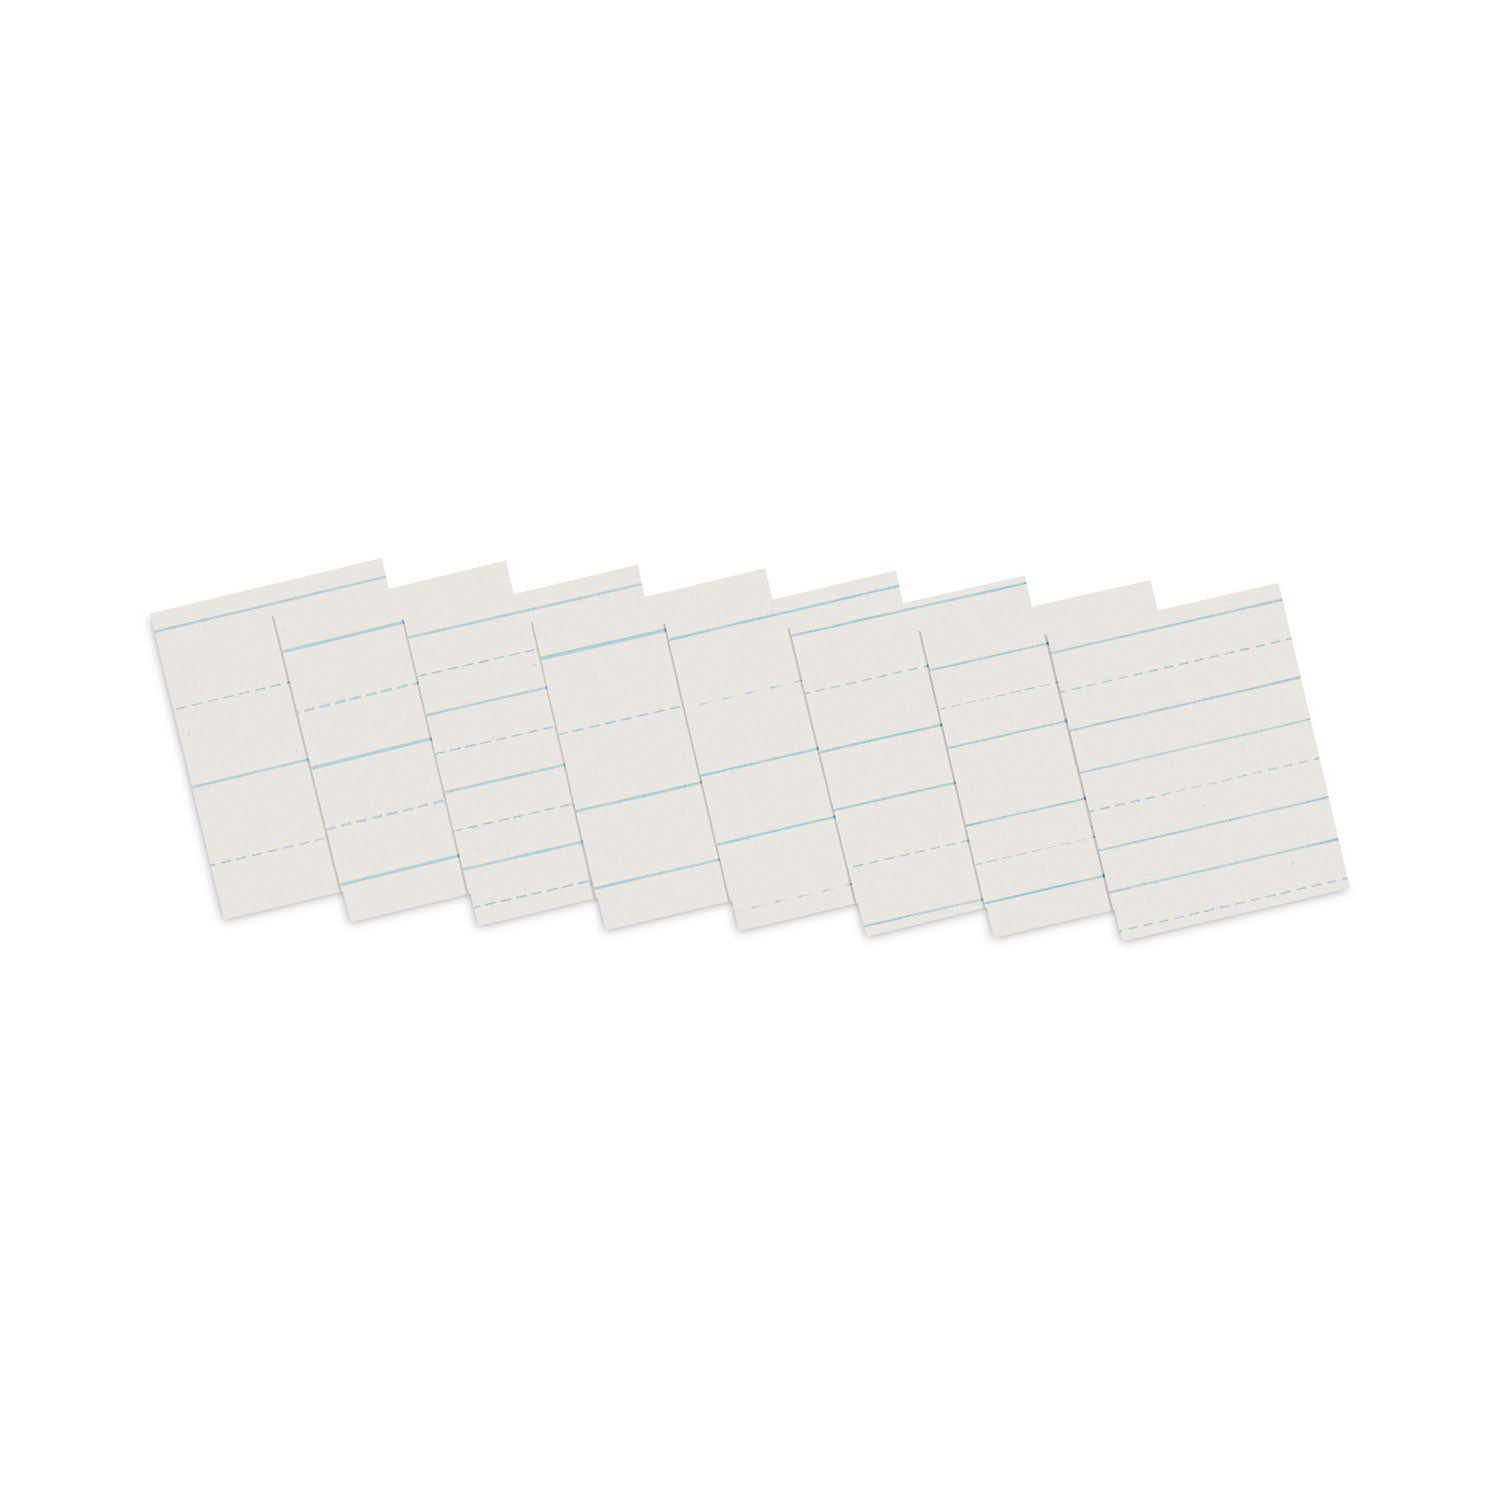 Skip-A-Line Ruled Newsprint Paper, 3/4" Two-Sided Long Rule, 8.5 x 11, 500/Ream - 